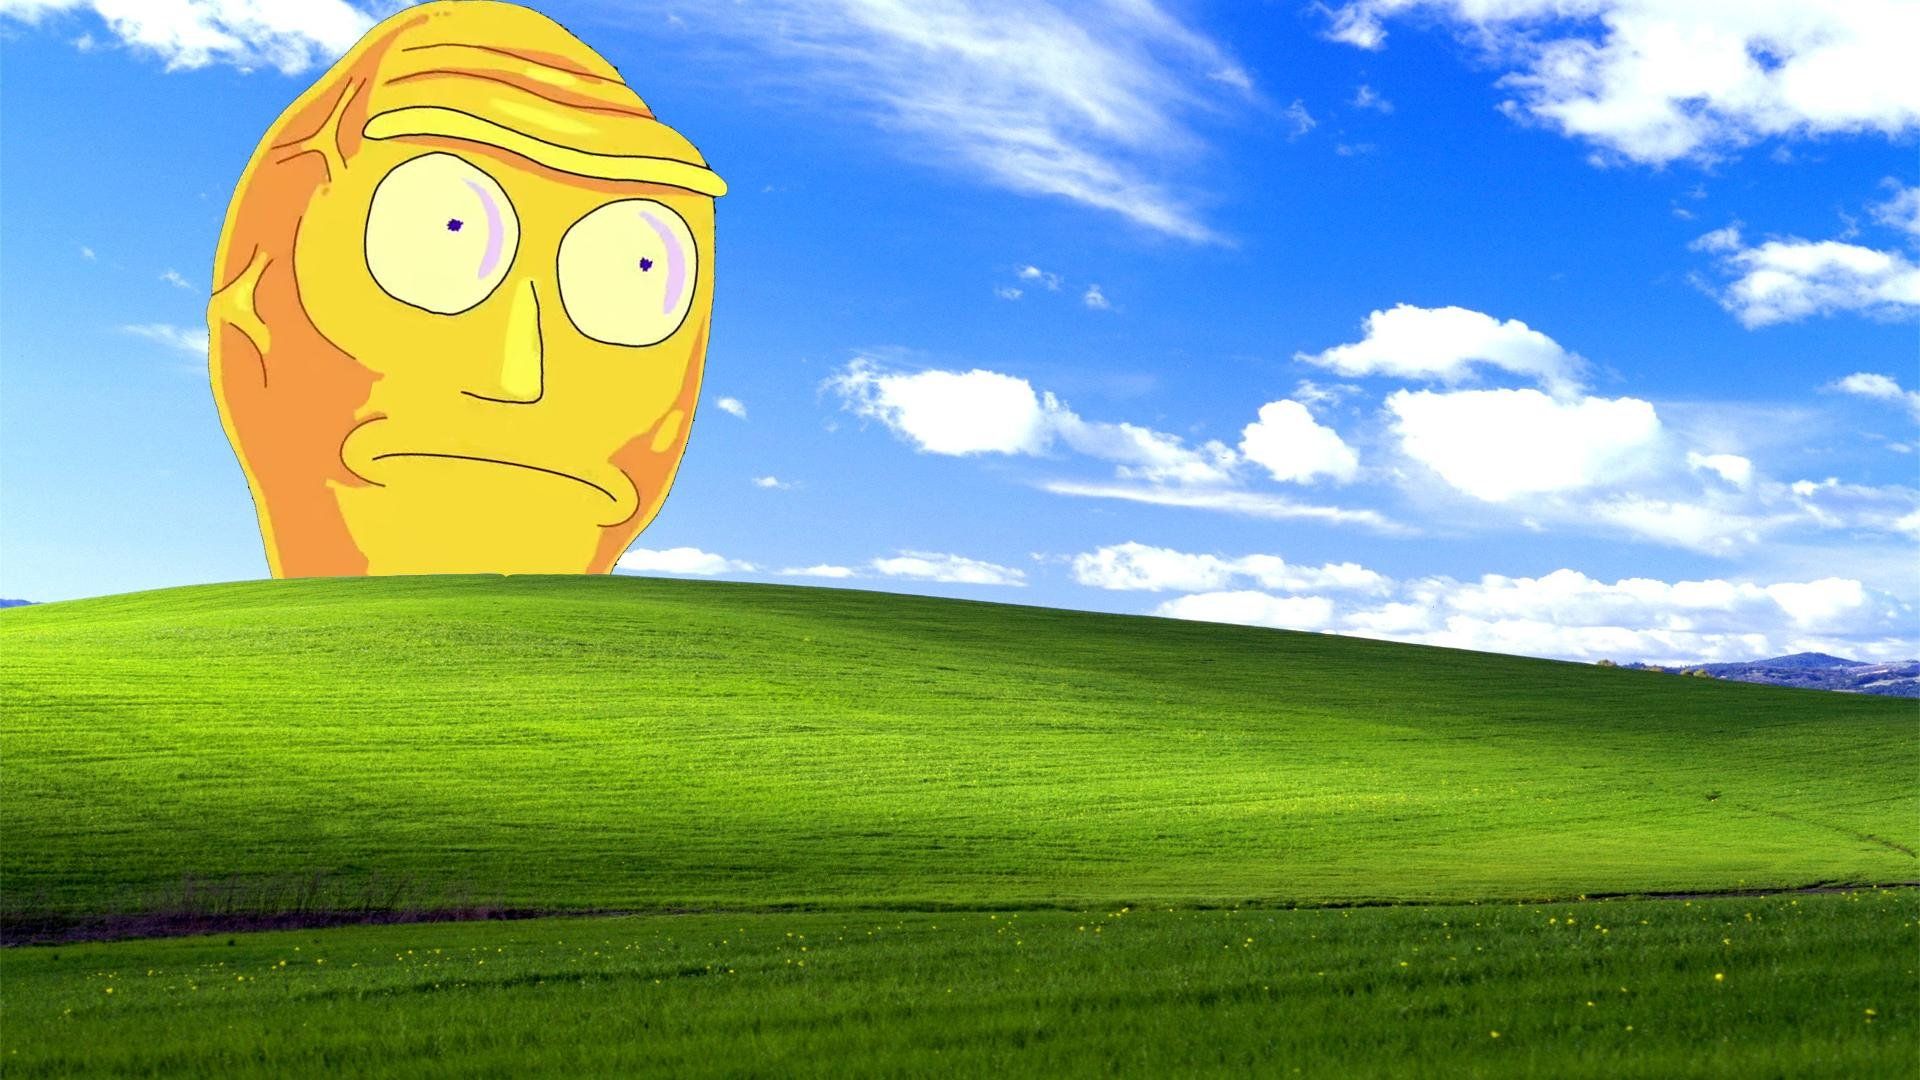 Windows Xp Show Me What You Got Wallpaper In 1920x1080 Resolution